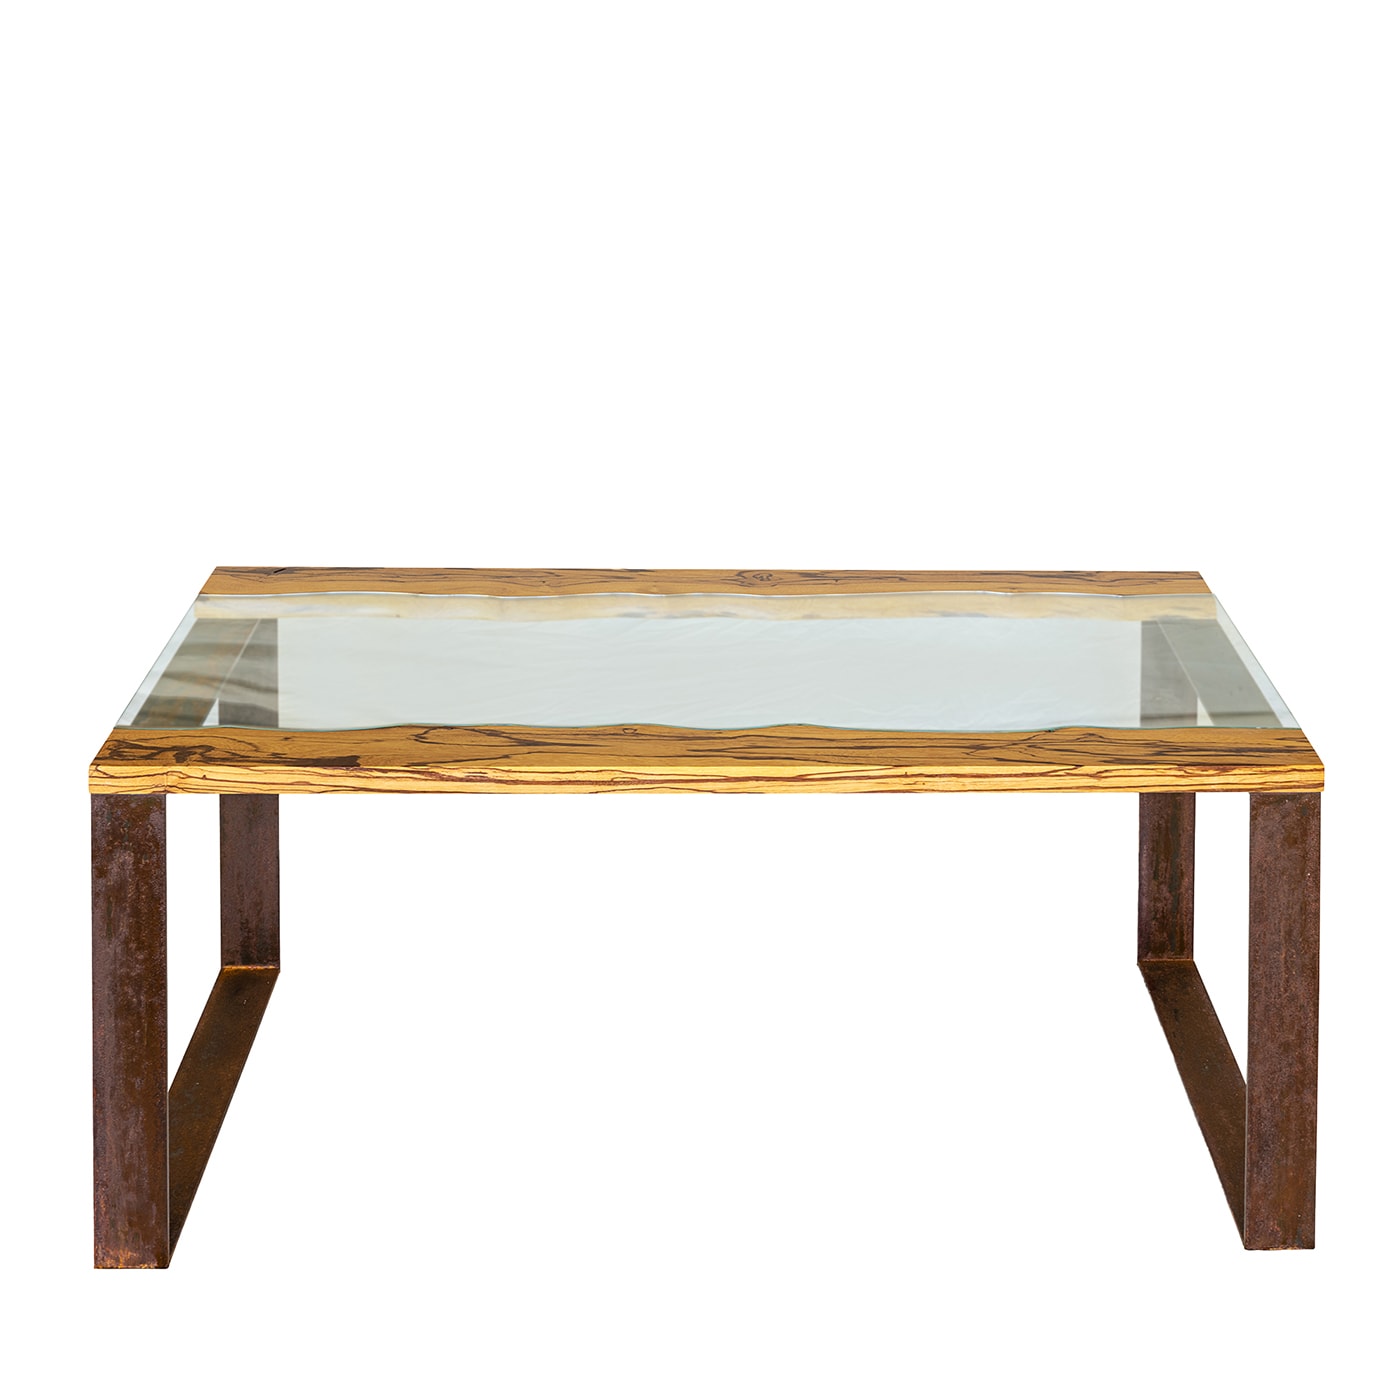 Bosta River Table - Slow Wood by Gianni Cantarutti